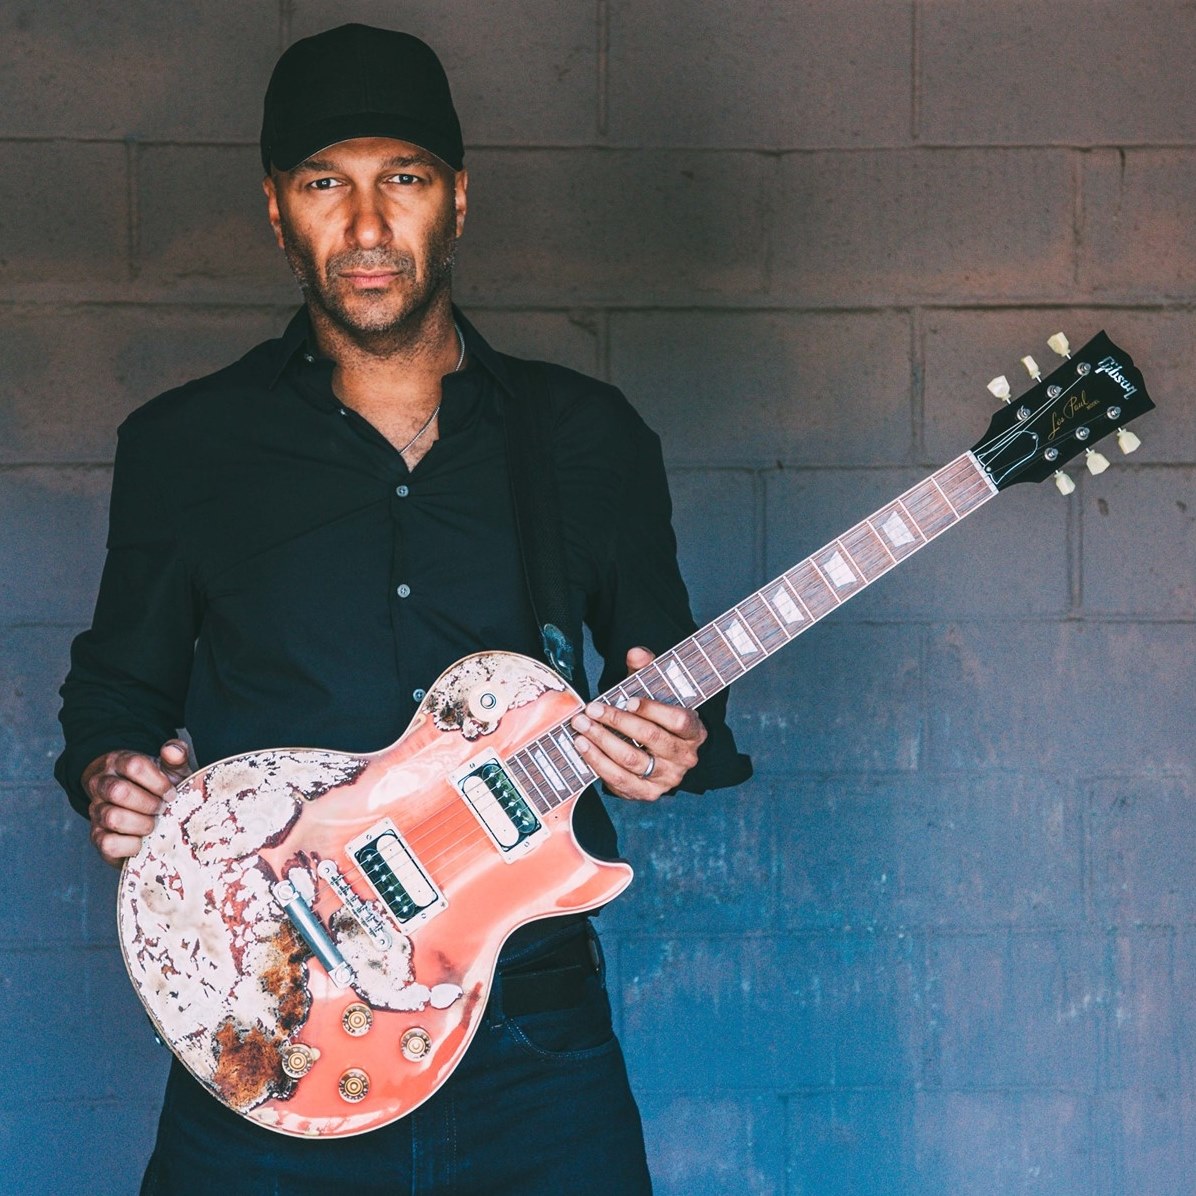 Rage Against the Machine’s Tom Morello covers Tom Waits song with the help of X-Ambassadors